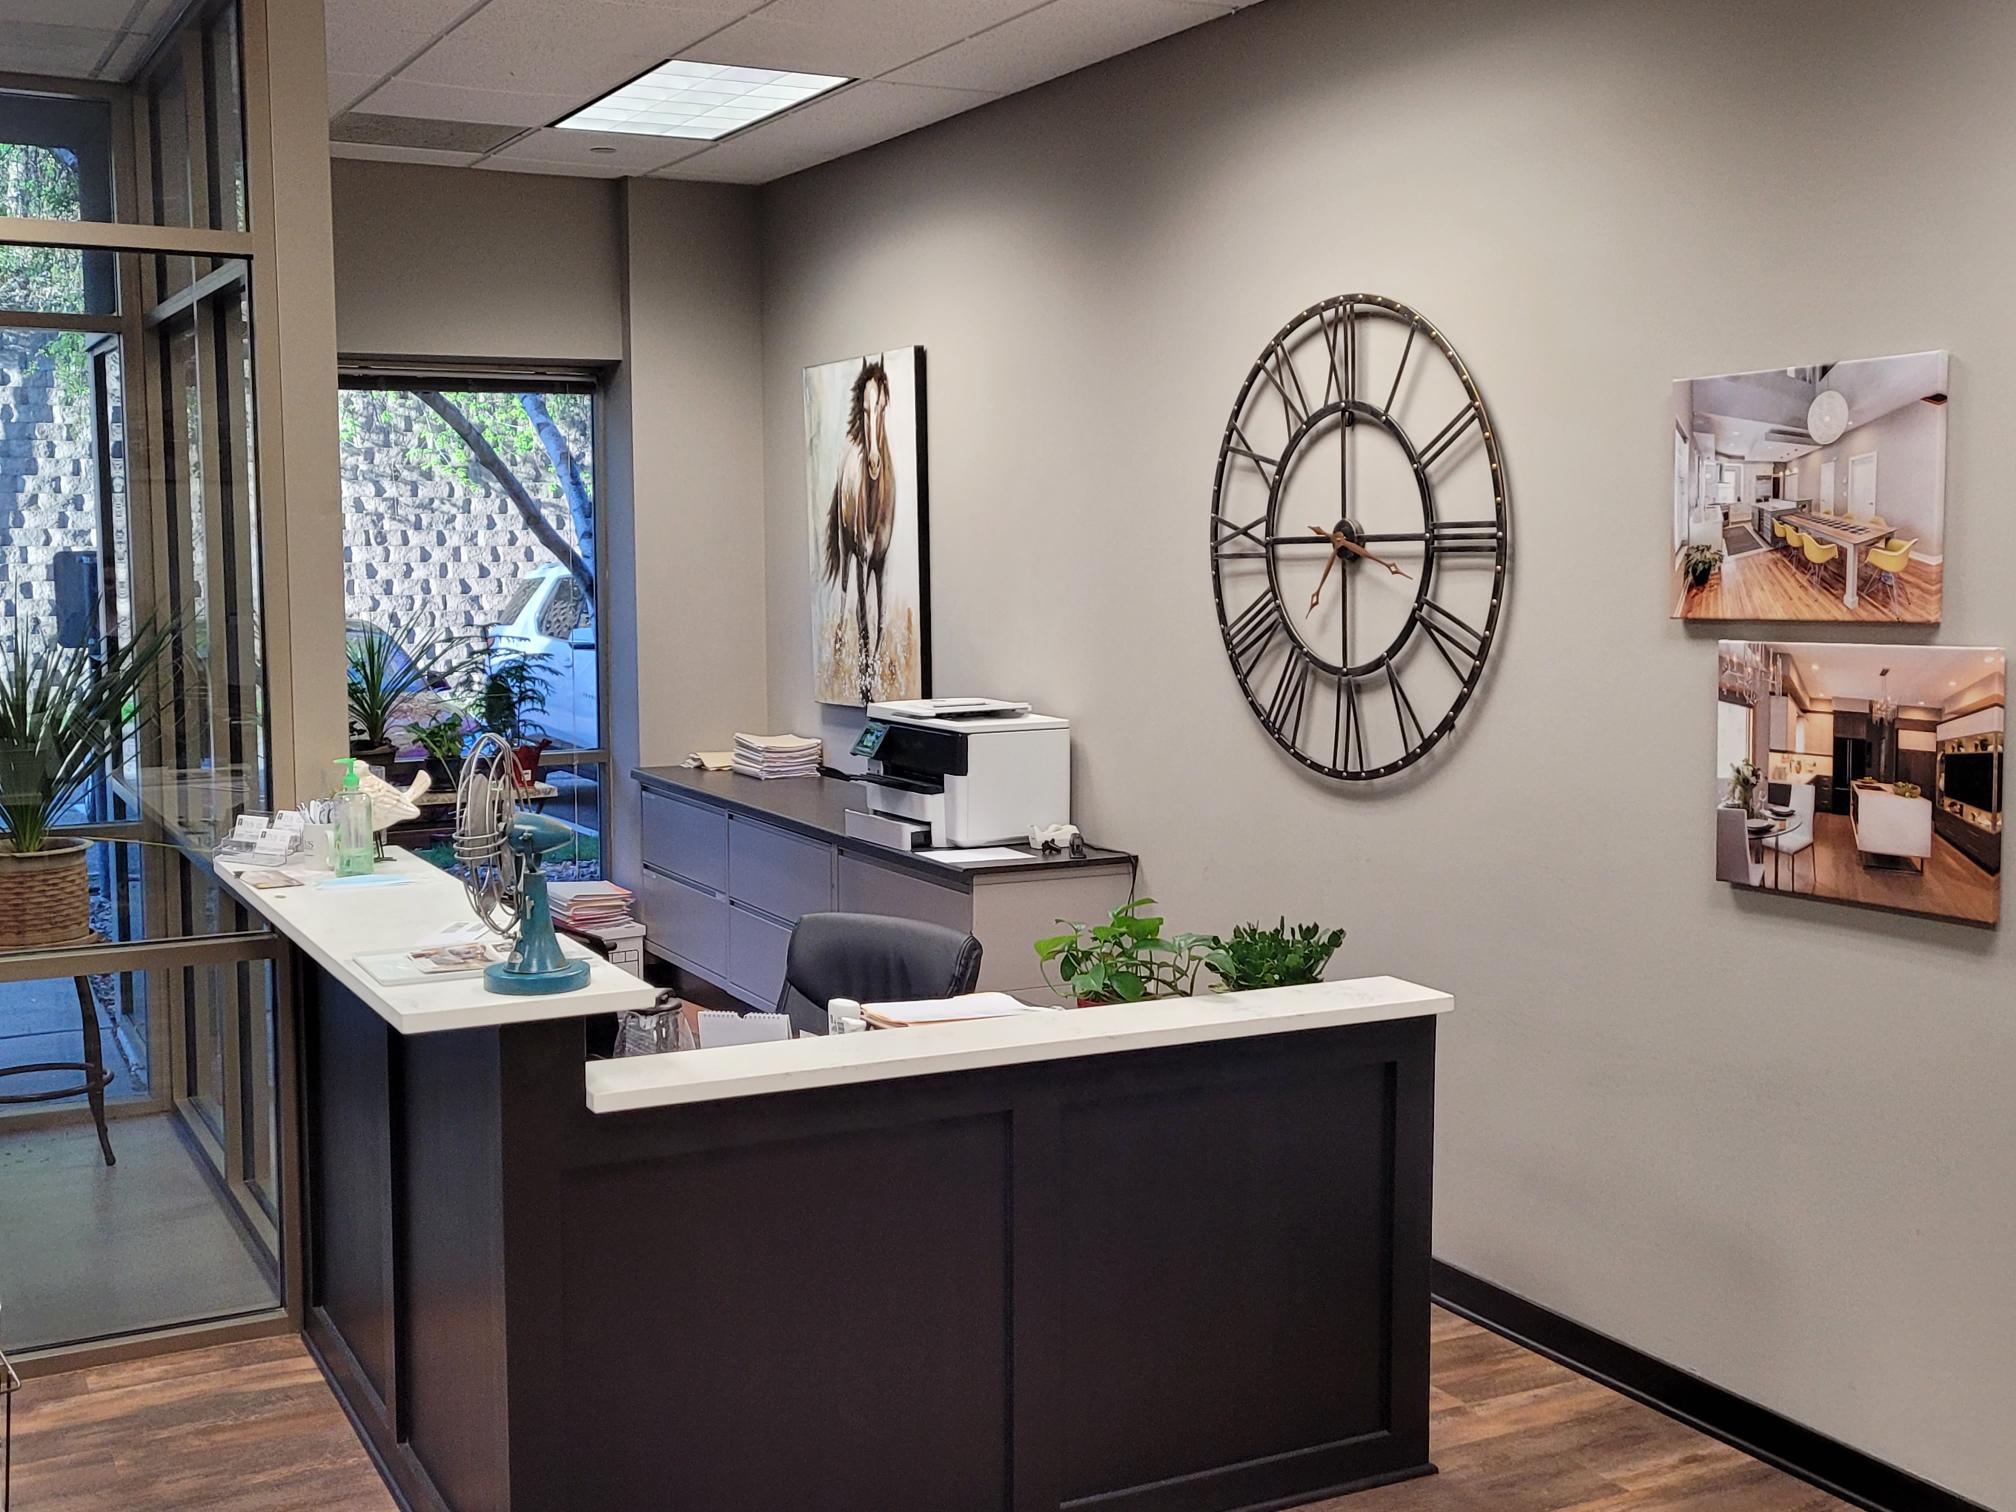 Post-pandemic office design and remodeling from Titus Contracting in the Twin Cities.